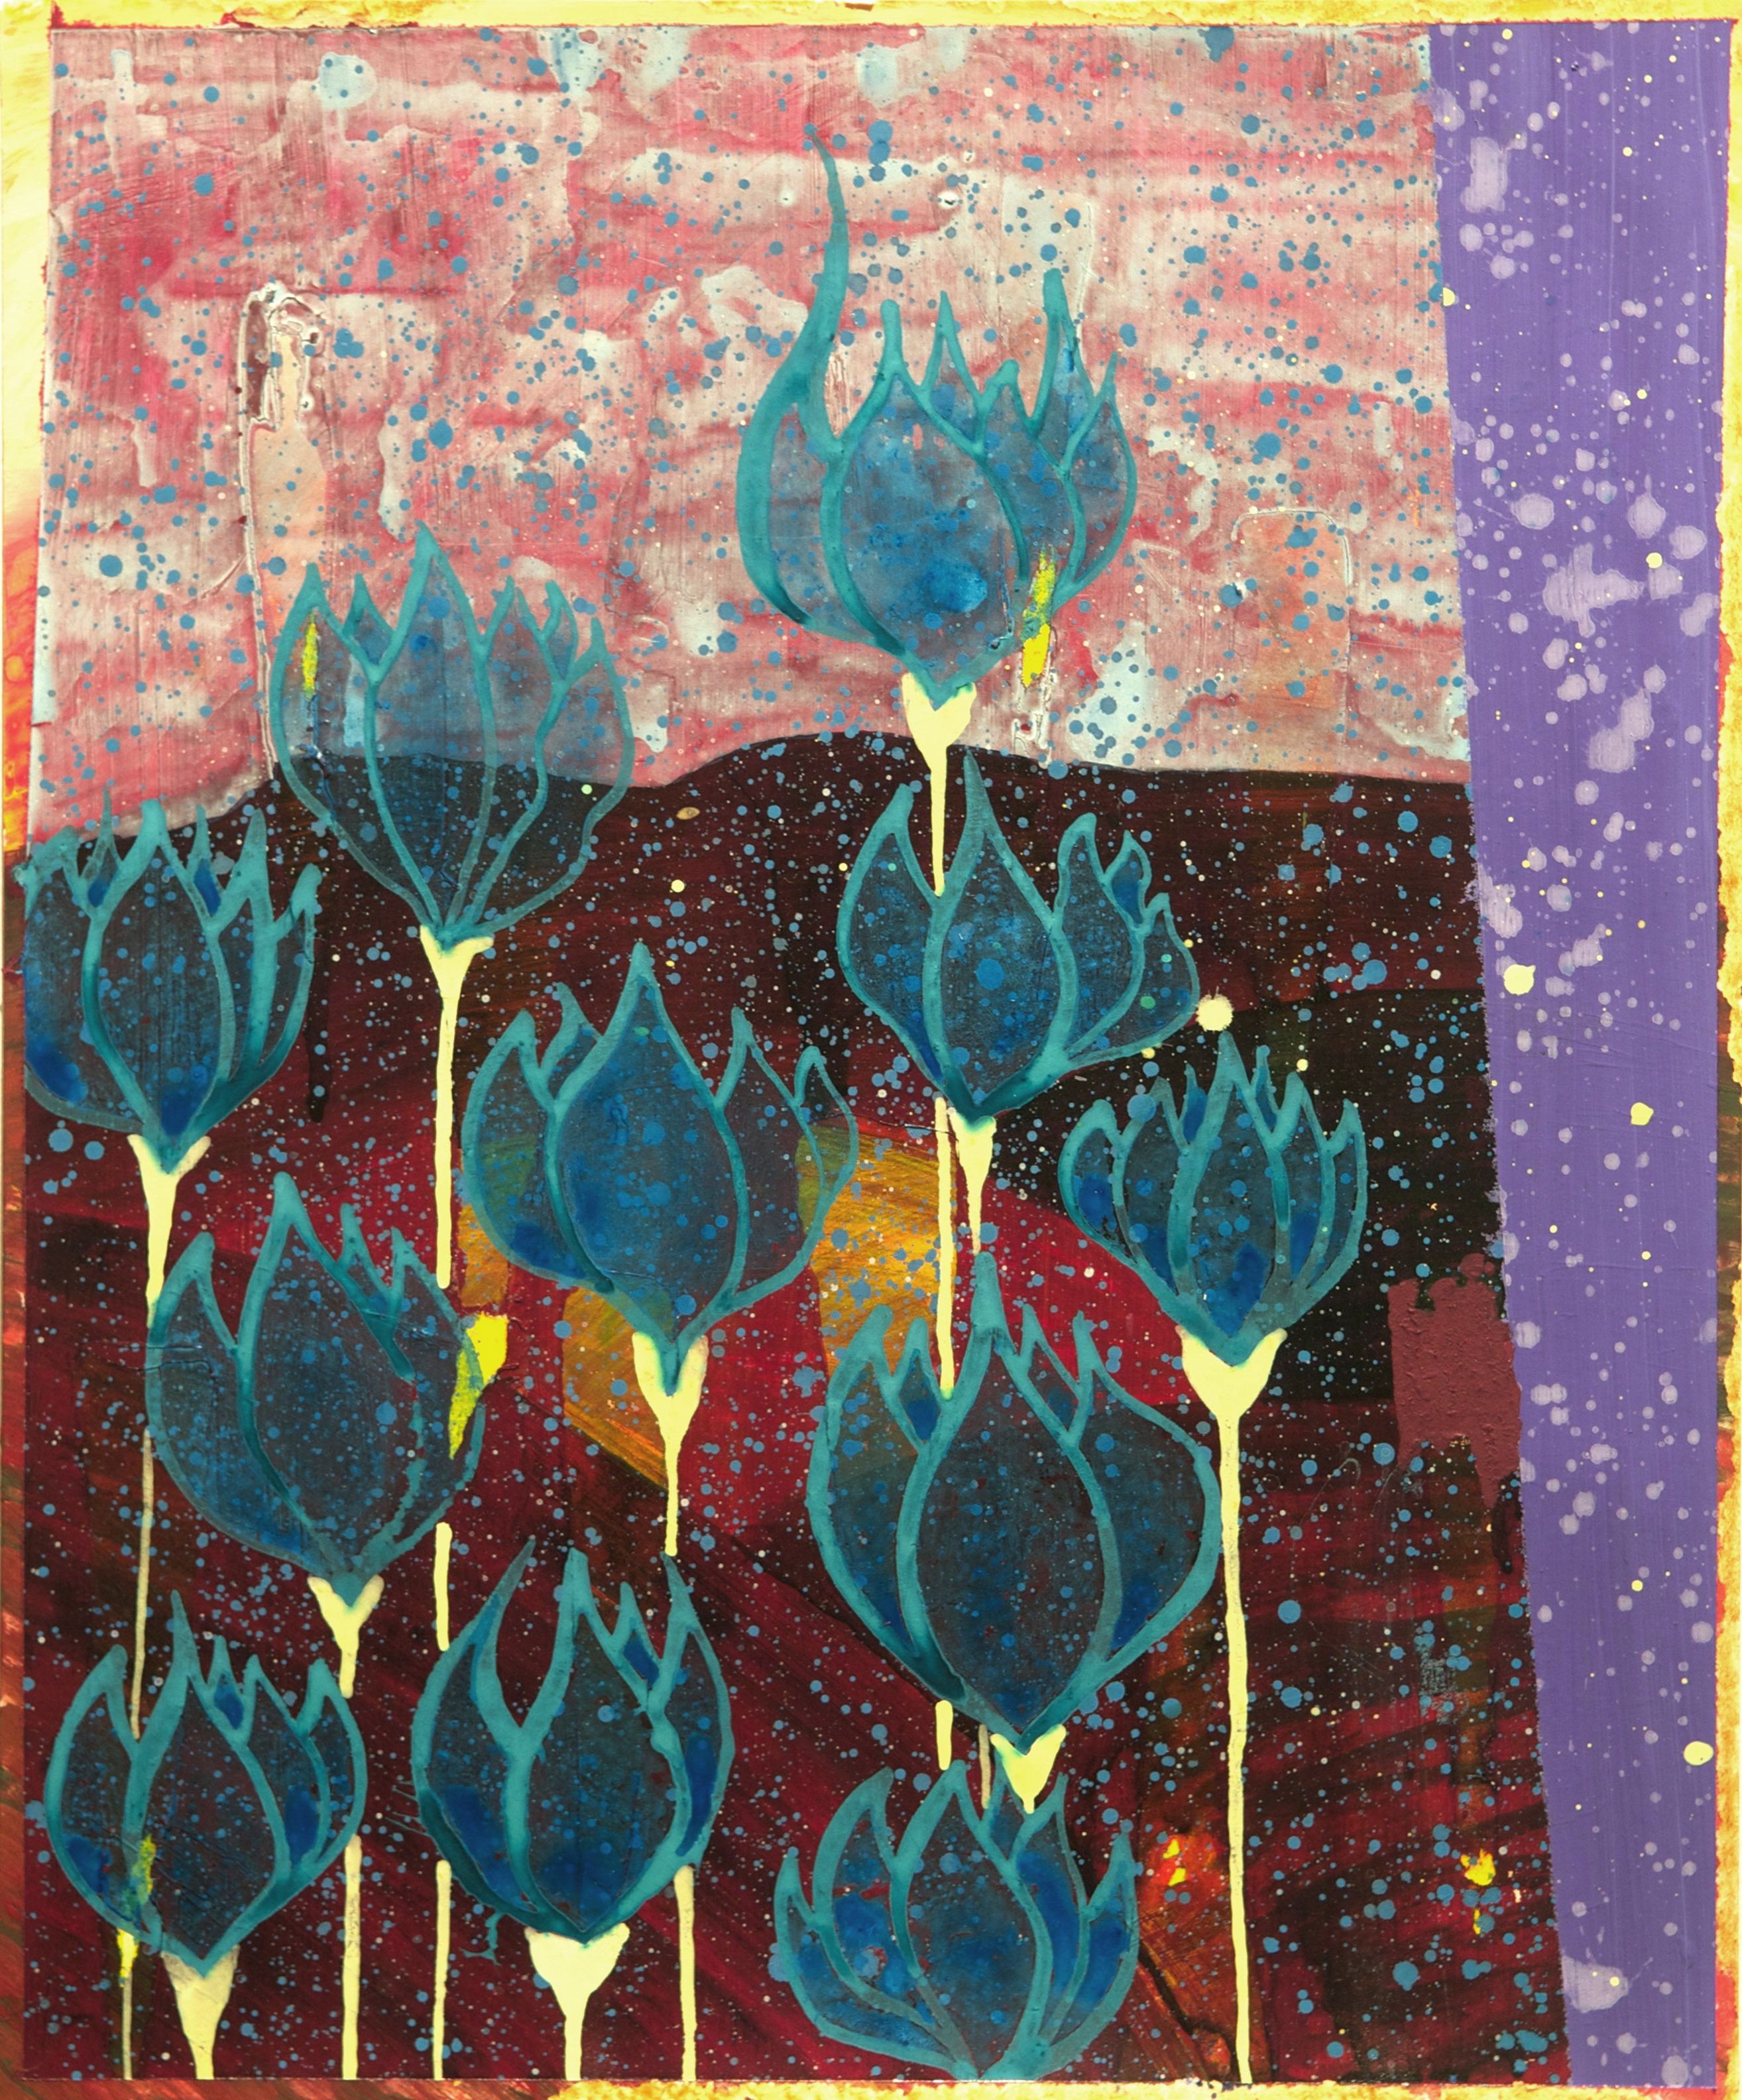 Jared_Deery-02_Tulips_in_the_Night_2015_ink_and_acrylic_on_paper